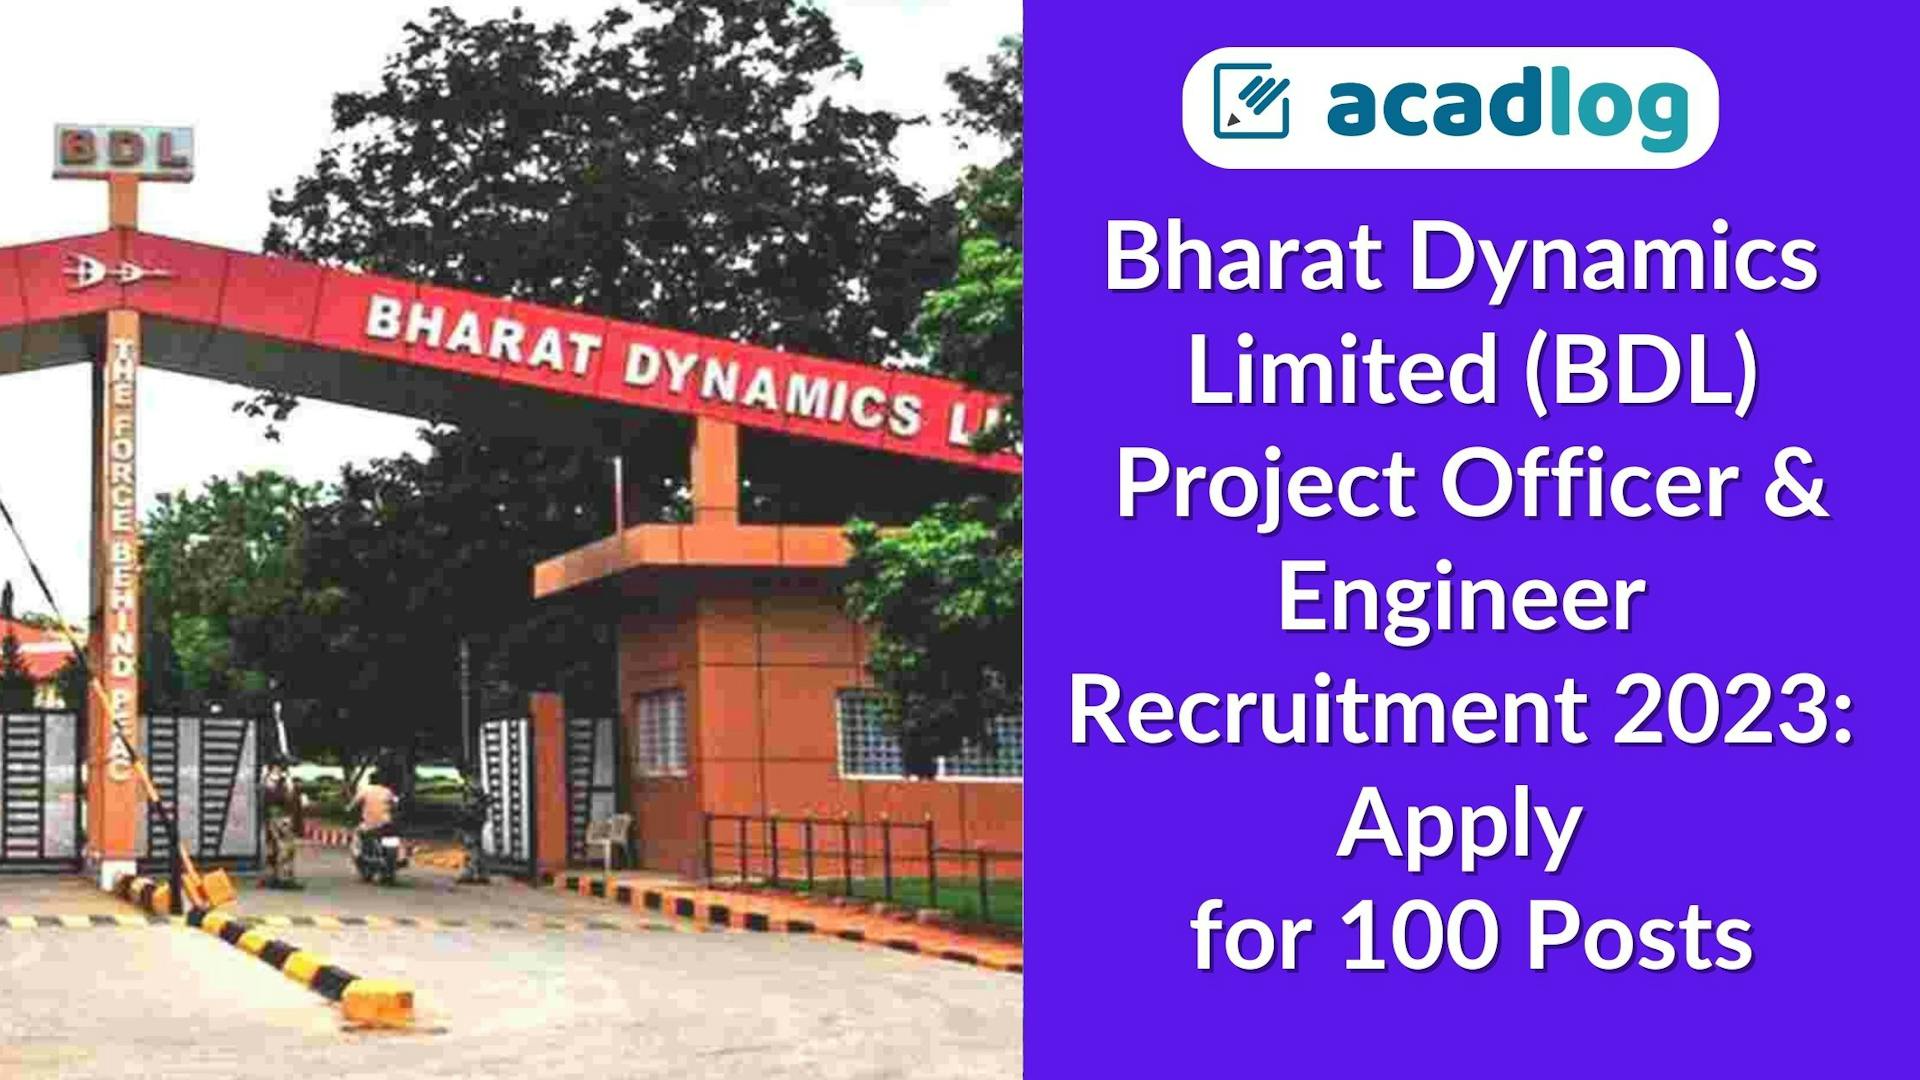 BDL Project Officer & Engineer 2023 Apply Online for 100 Posts